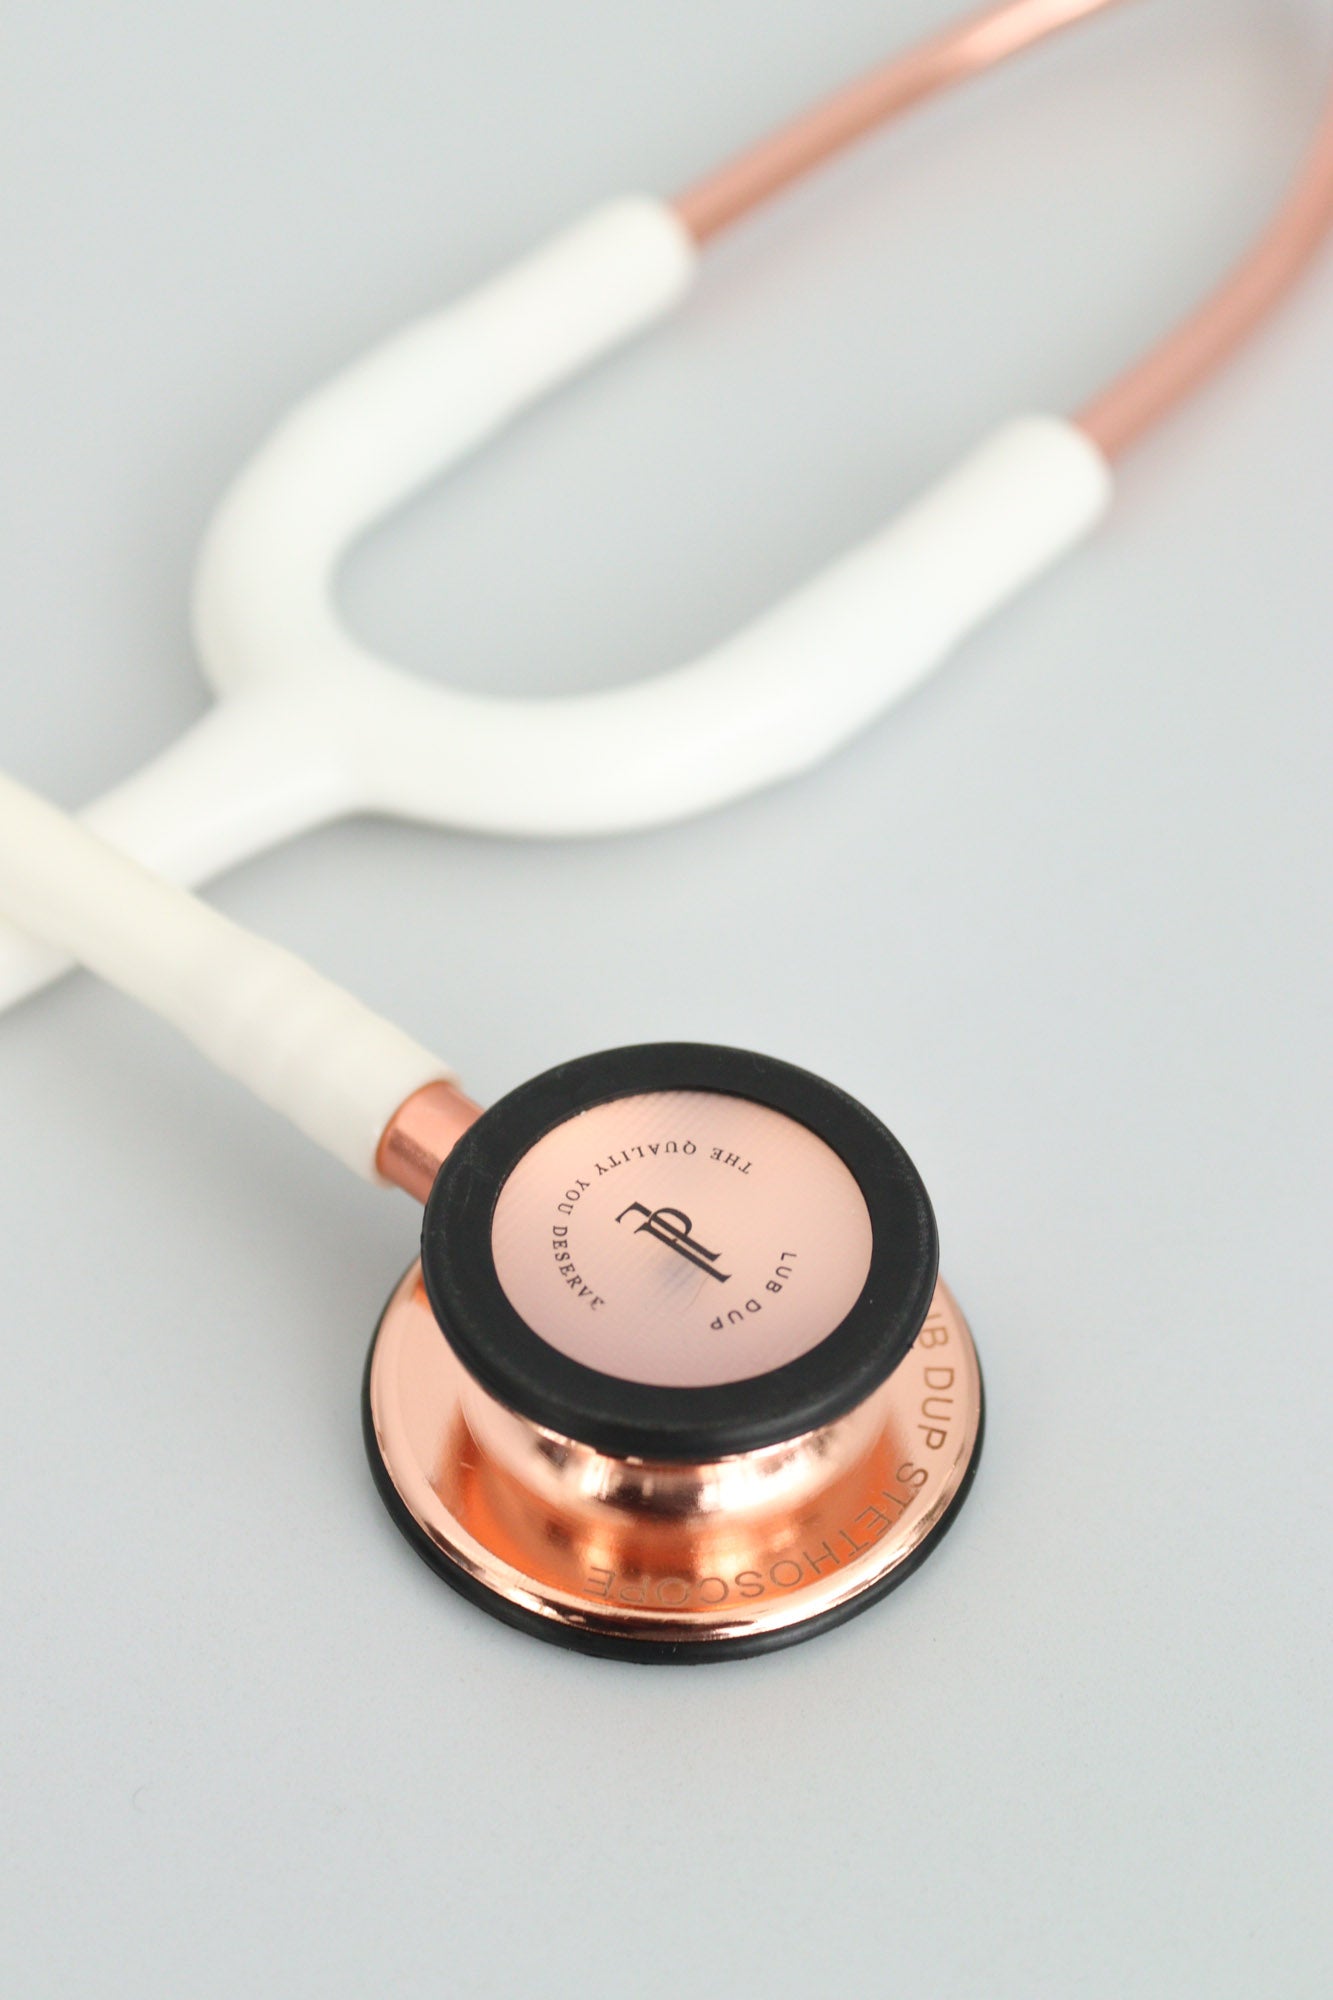 Lub Dup Adult Stethoscope - White-Rose Gold Edition